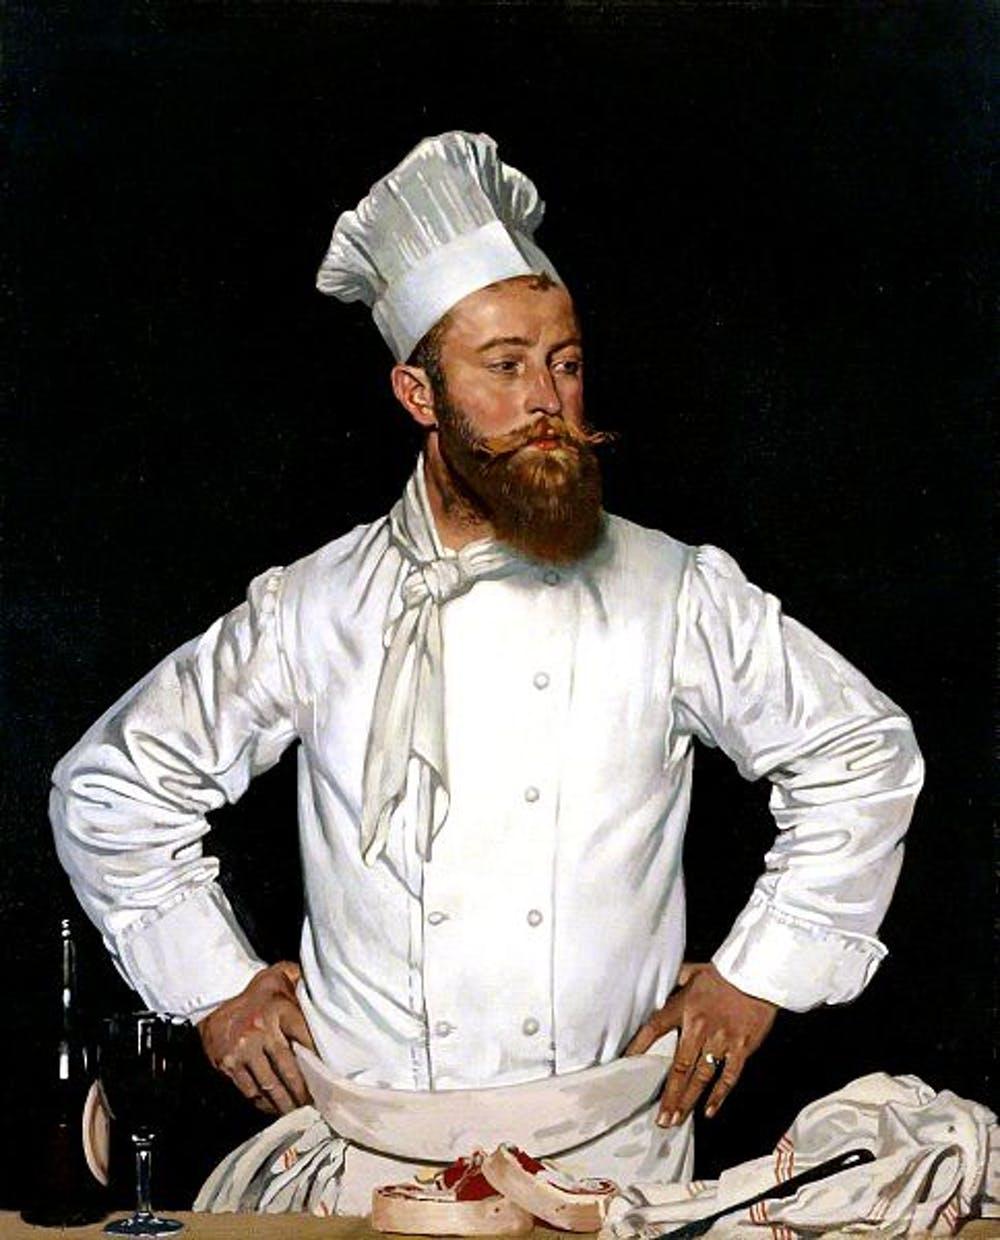 A painting of a chef wearing white chef hat and jacket